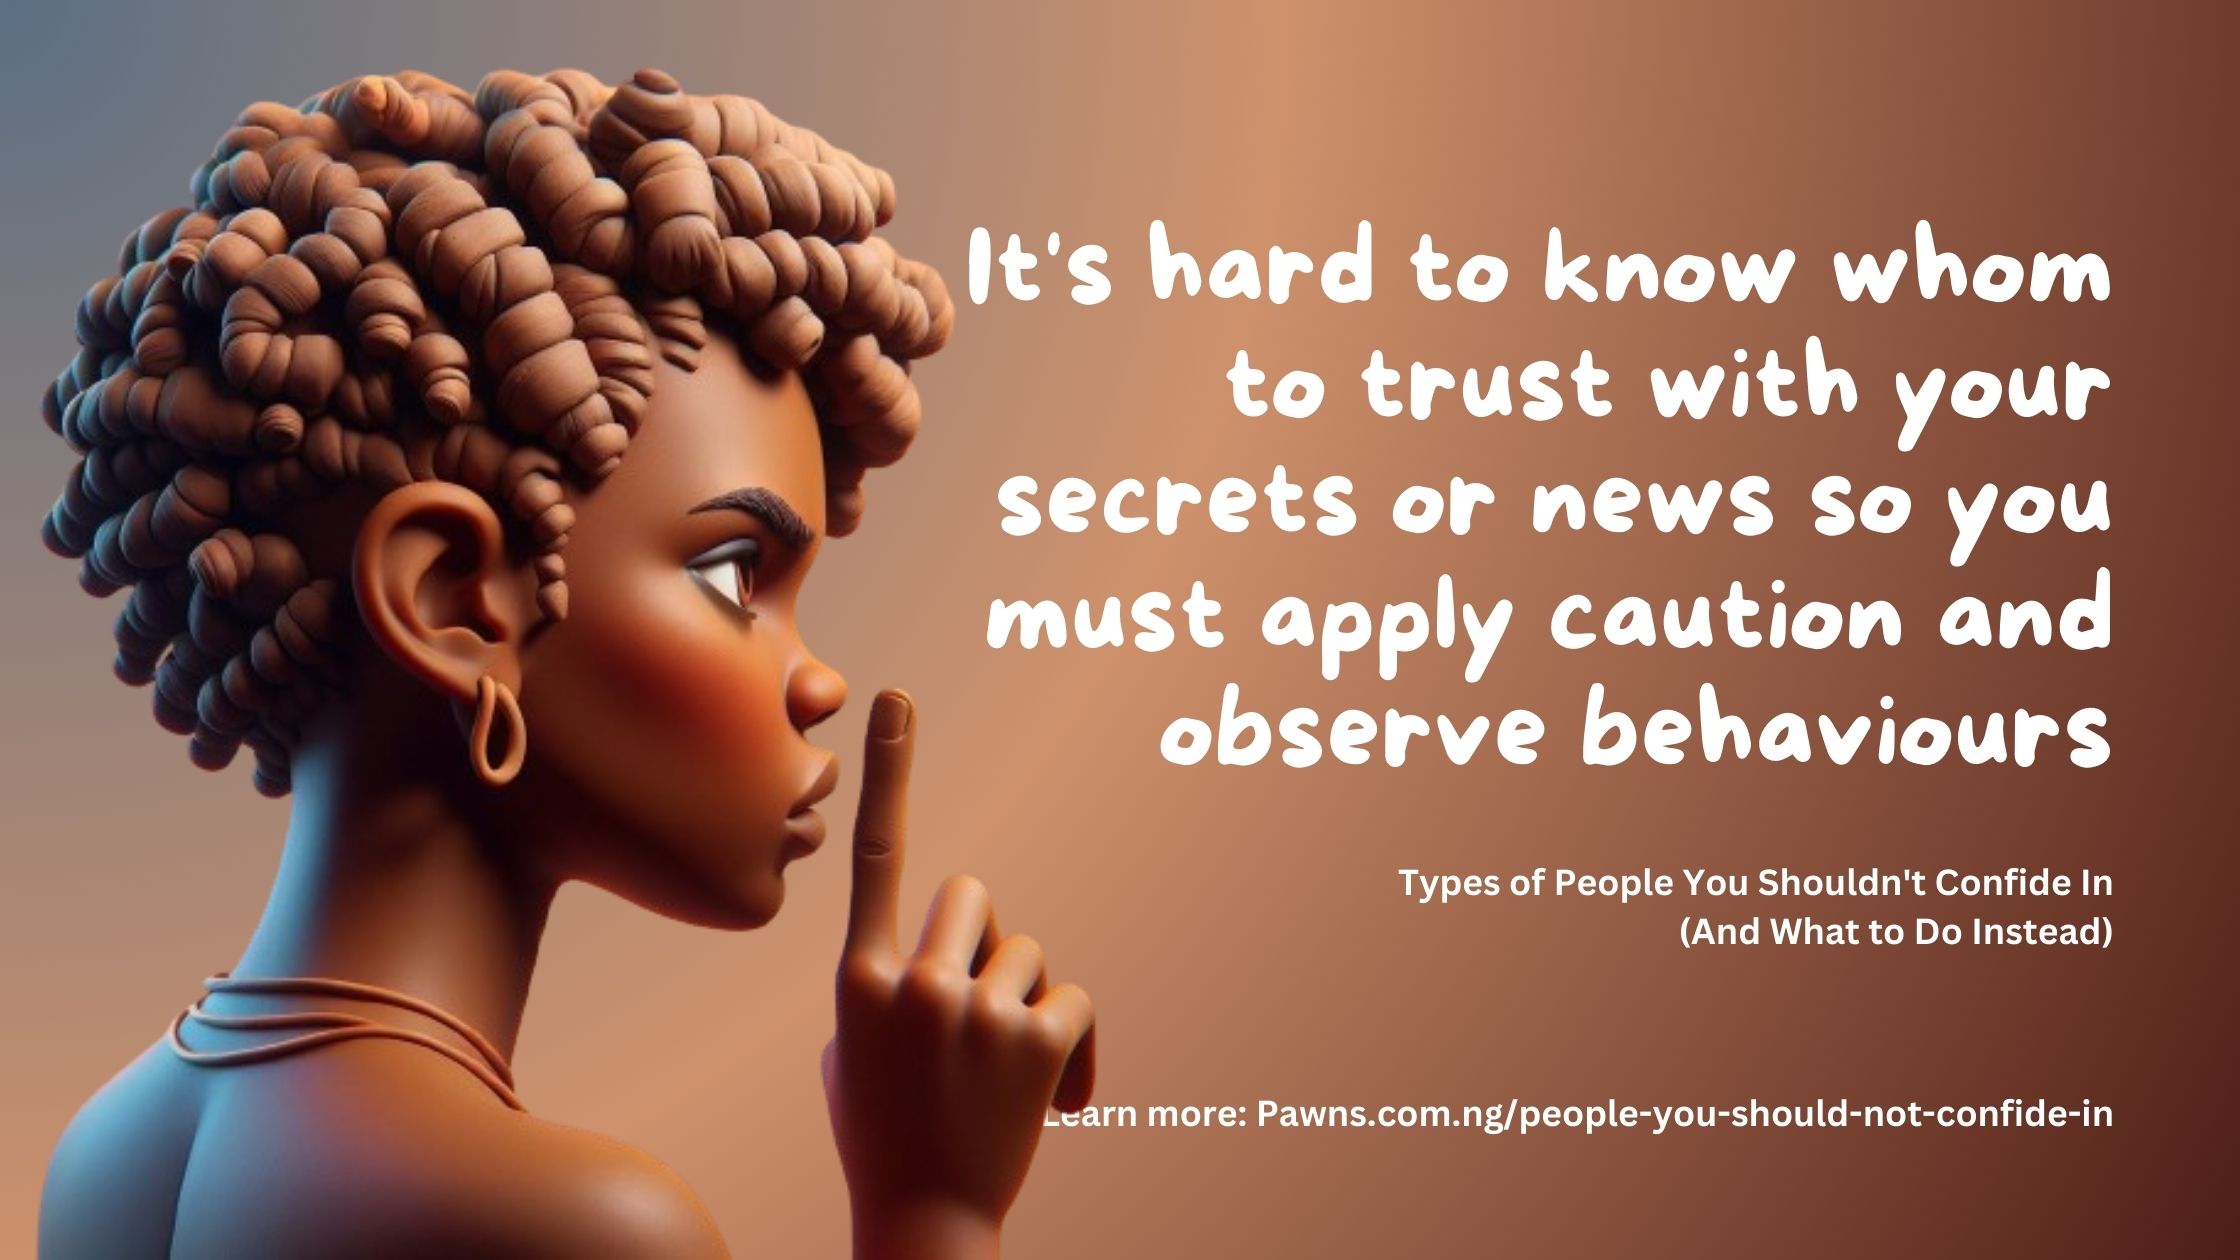 It's hard to know whom to trust with your secrets or news so you must apply caution and observe behaviours Types of People You Shouldn't Confide In And What to Do Instead